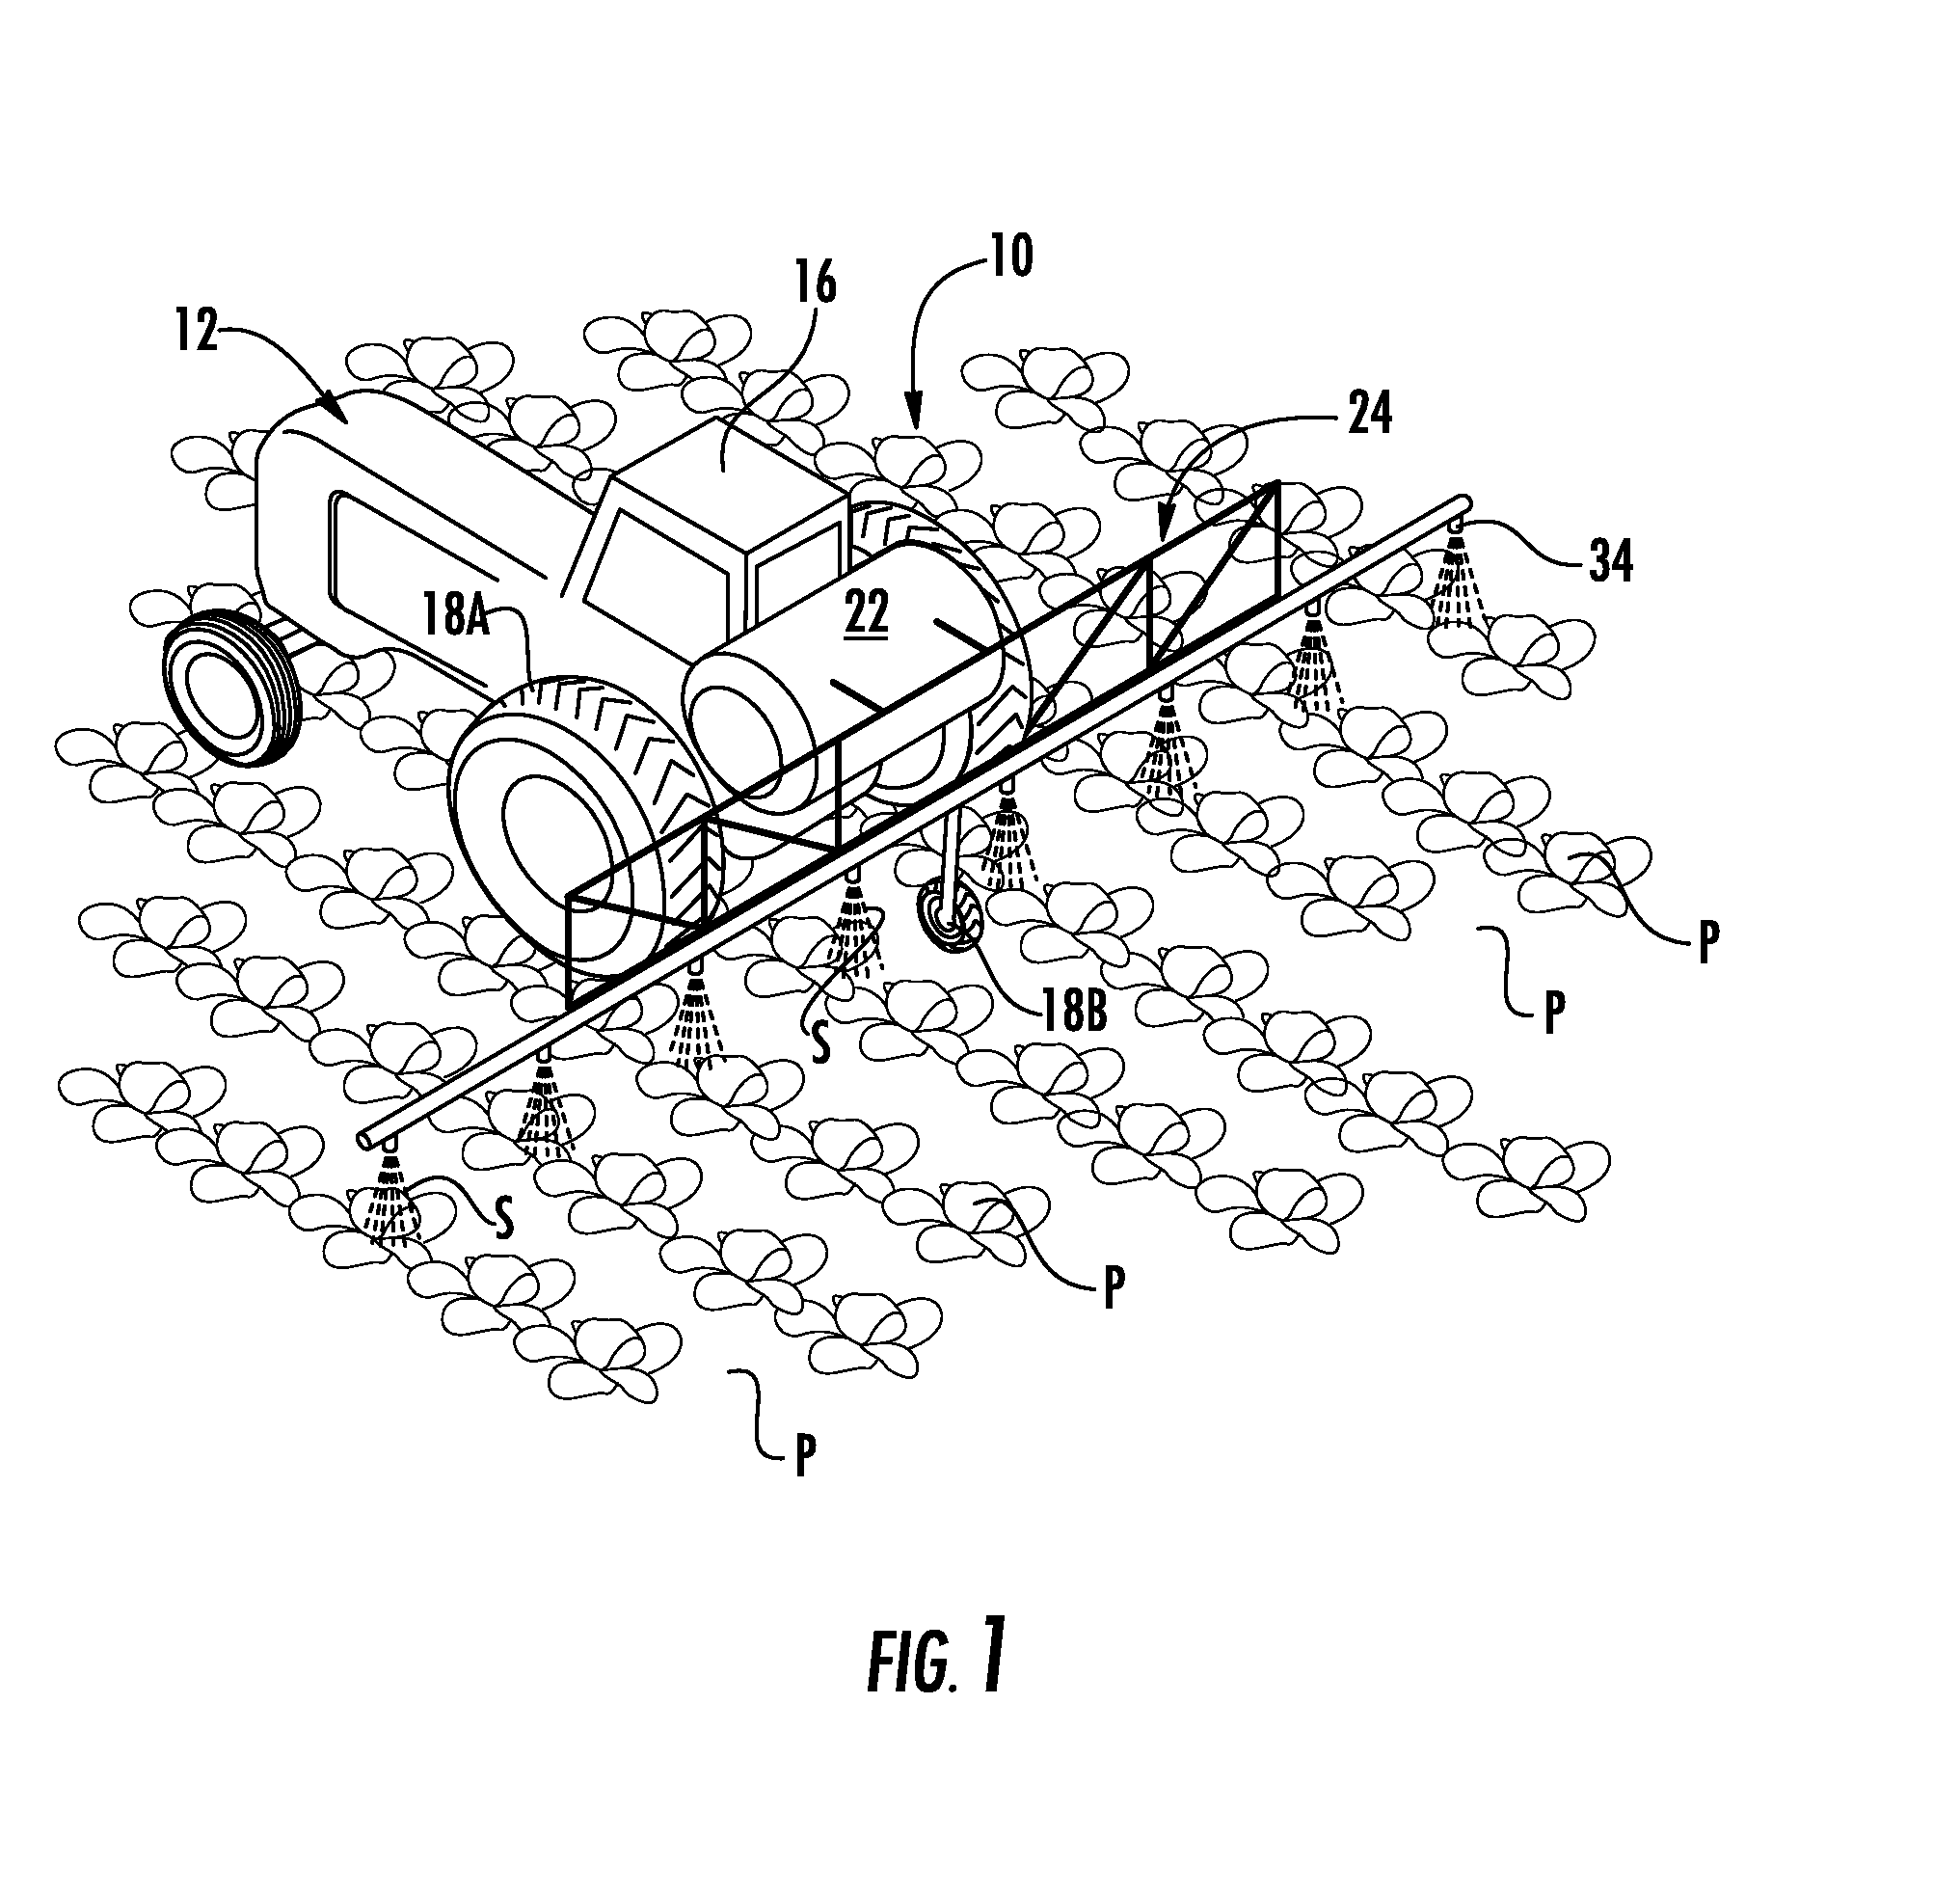 Electrically actuated variable pressure controll system